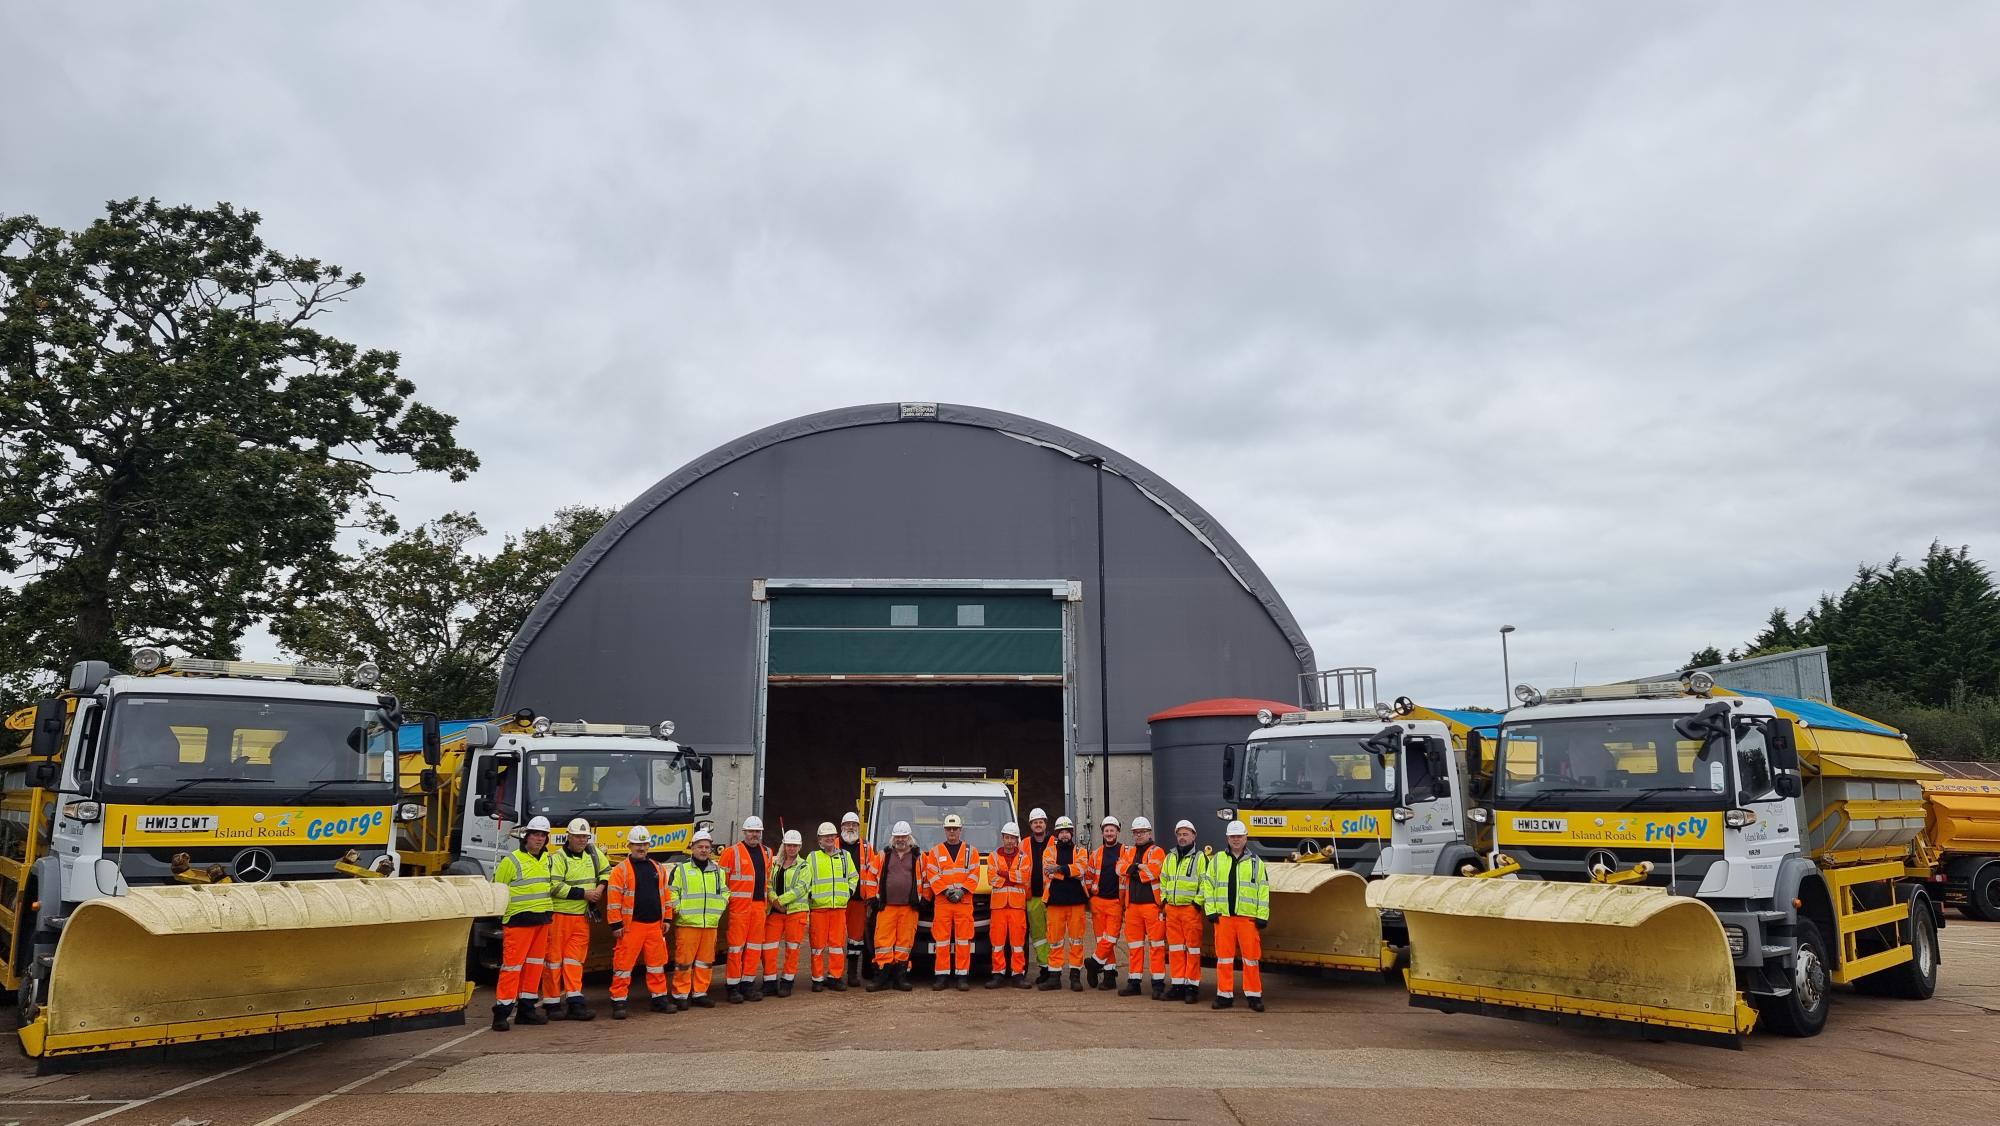 several gritting lorries lined up in a semi circle facing with a large group of men in hard hats and brightly coloured protective work gear. Large storage barn in the background and trees in the distance either side.